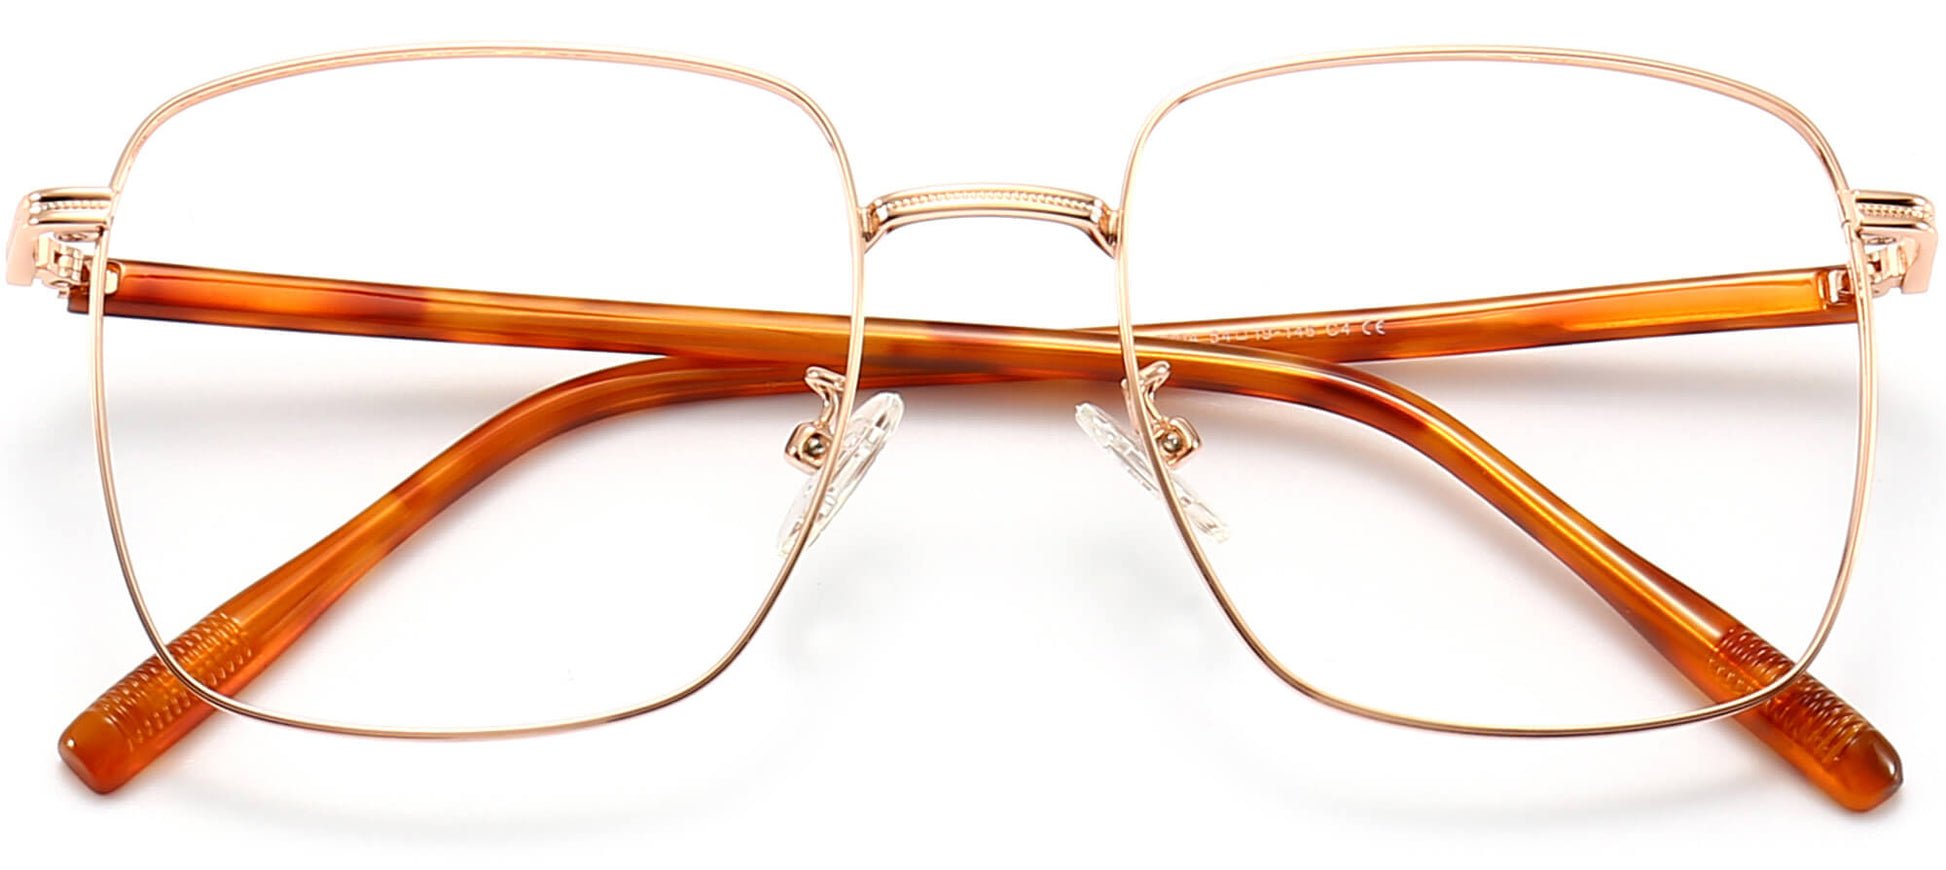 Cadence Square Gold Eyeglasses from ANRRI, closed view